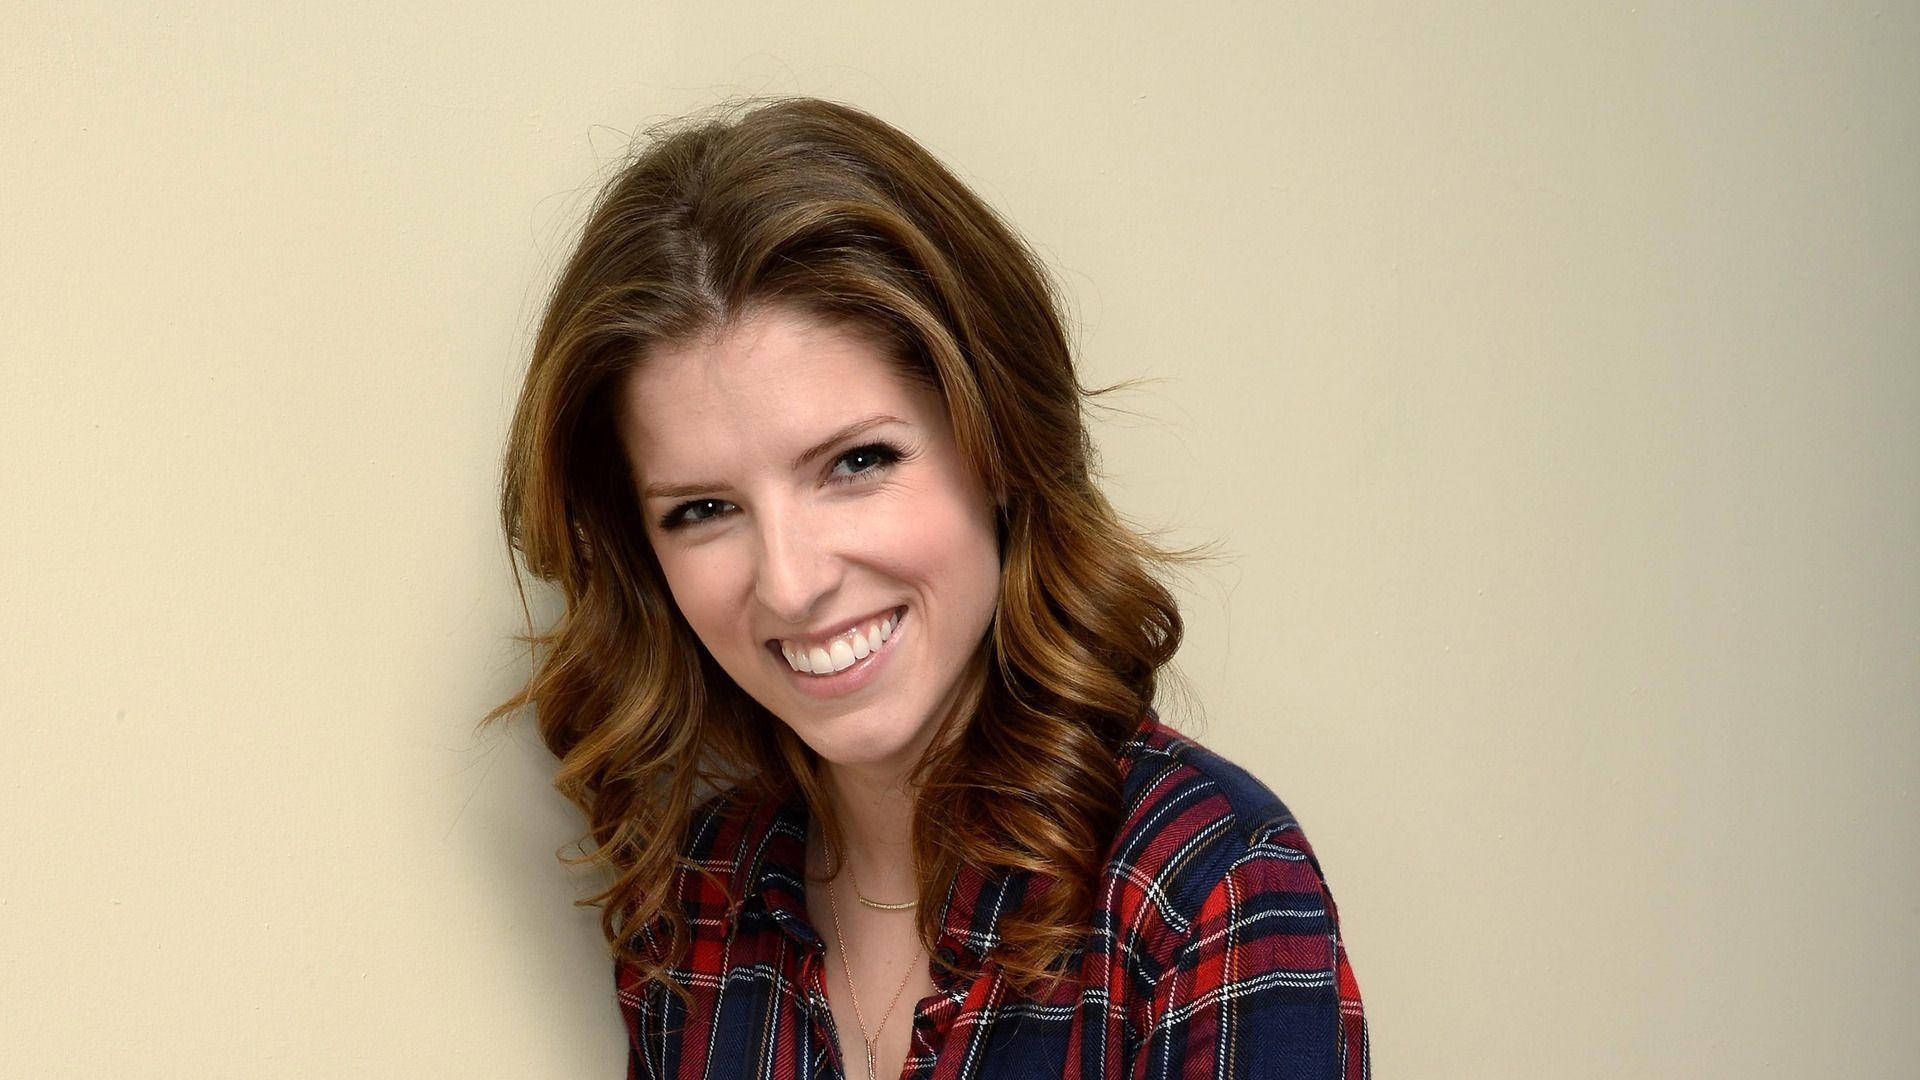 Hollywood Star Anna Kendrick Infectious Laughter Wallpaper